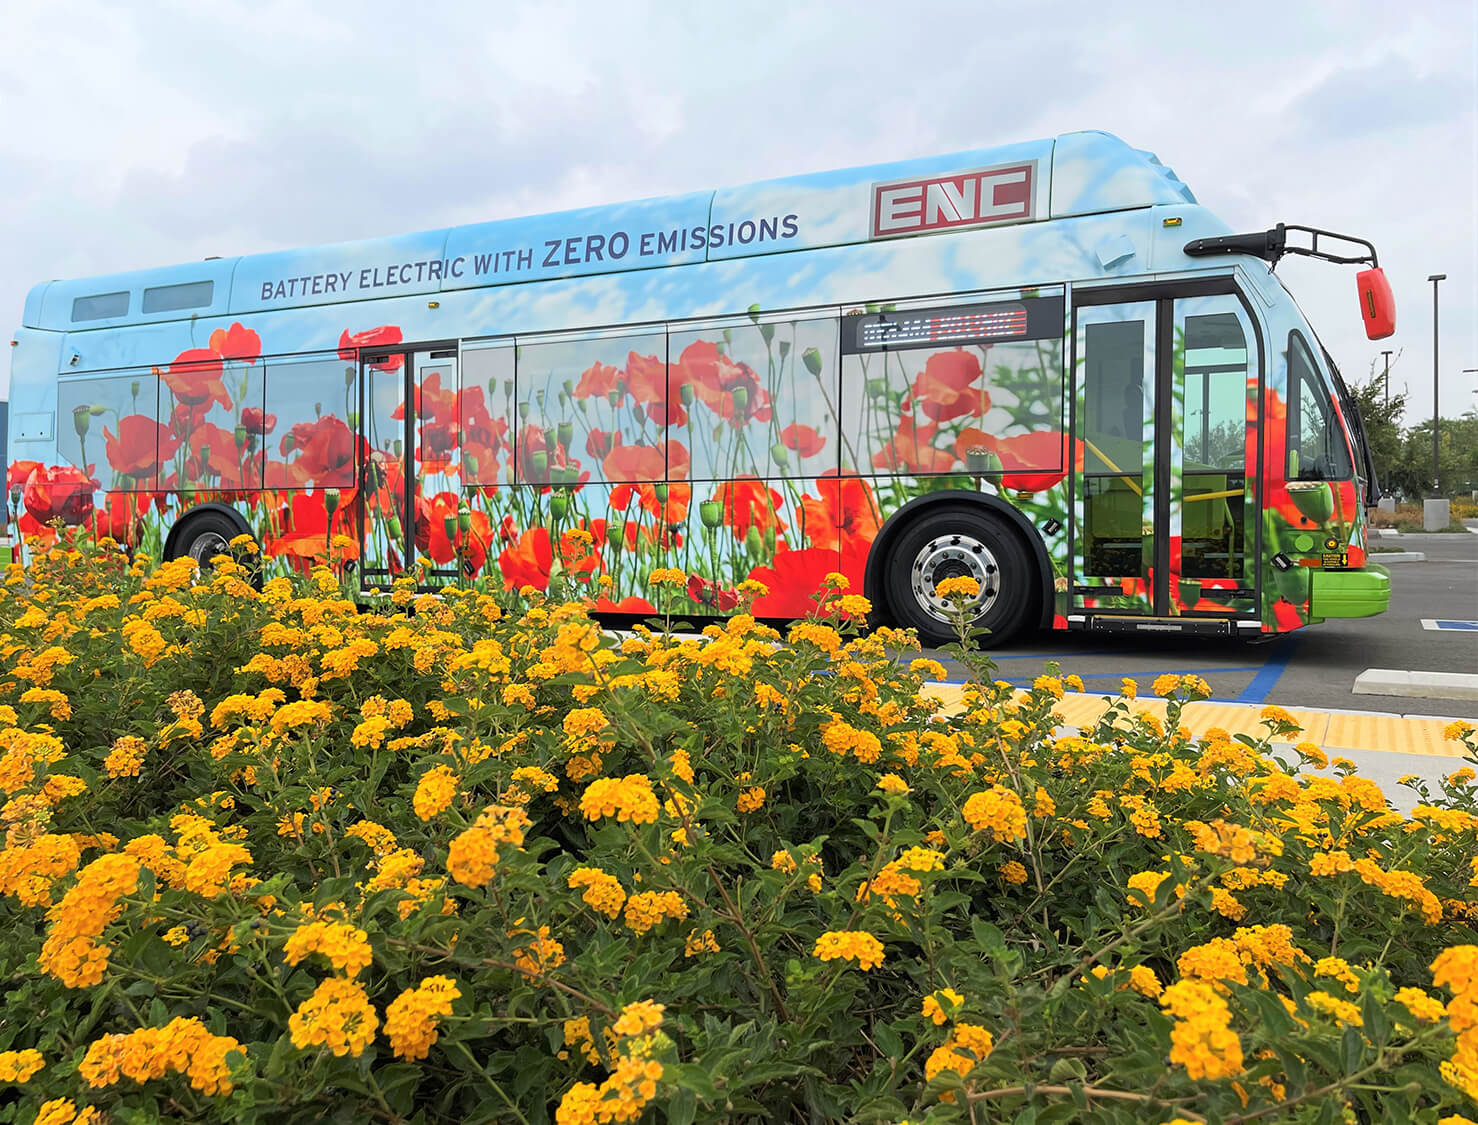 Image of ENC Axess Battery Electric Zero Emissions Bus at APTA Expo. It is on a street with flowers in front of it